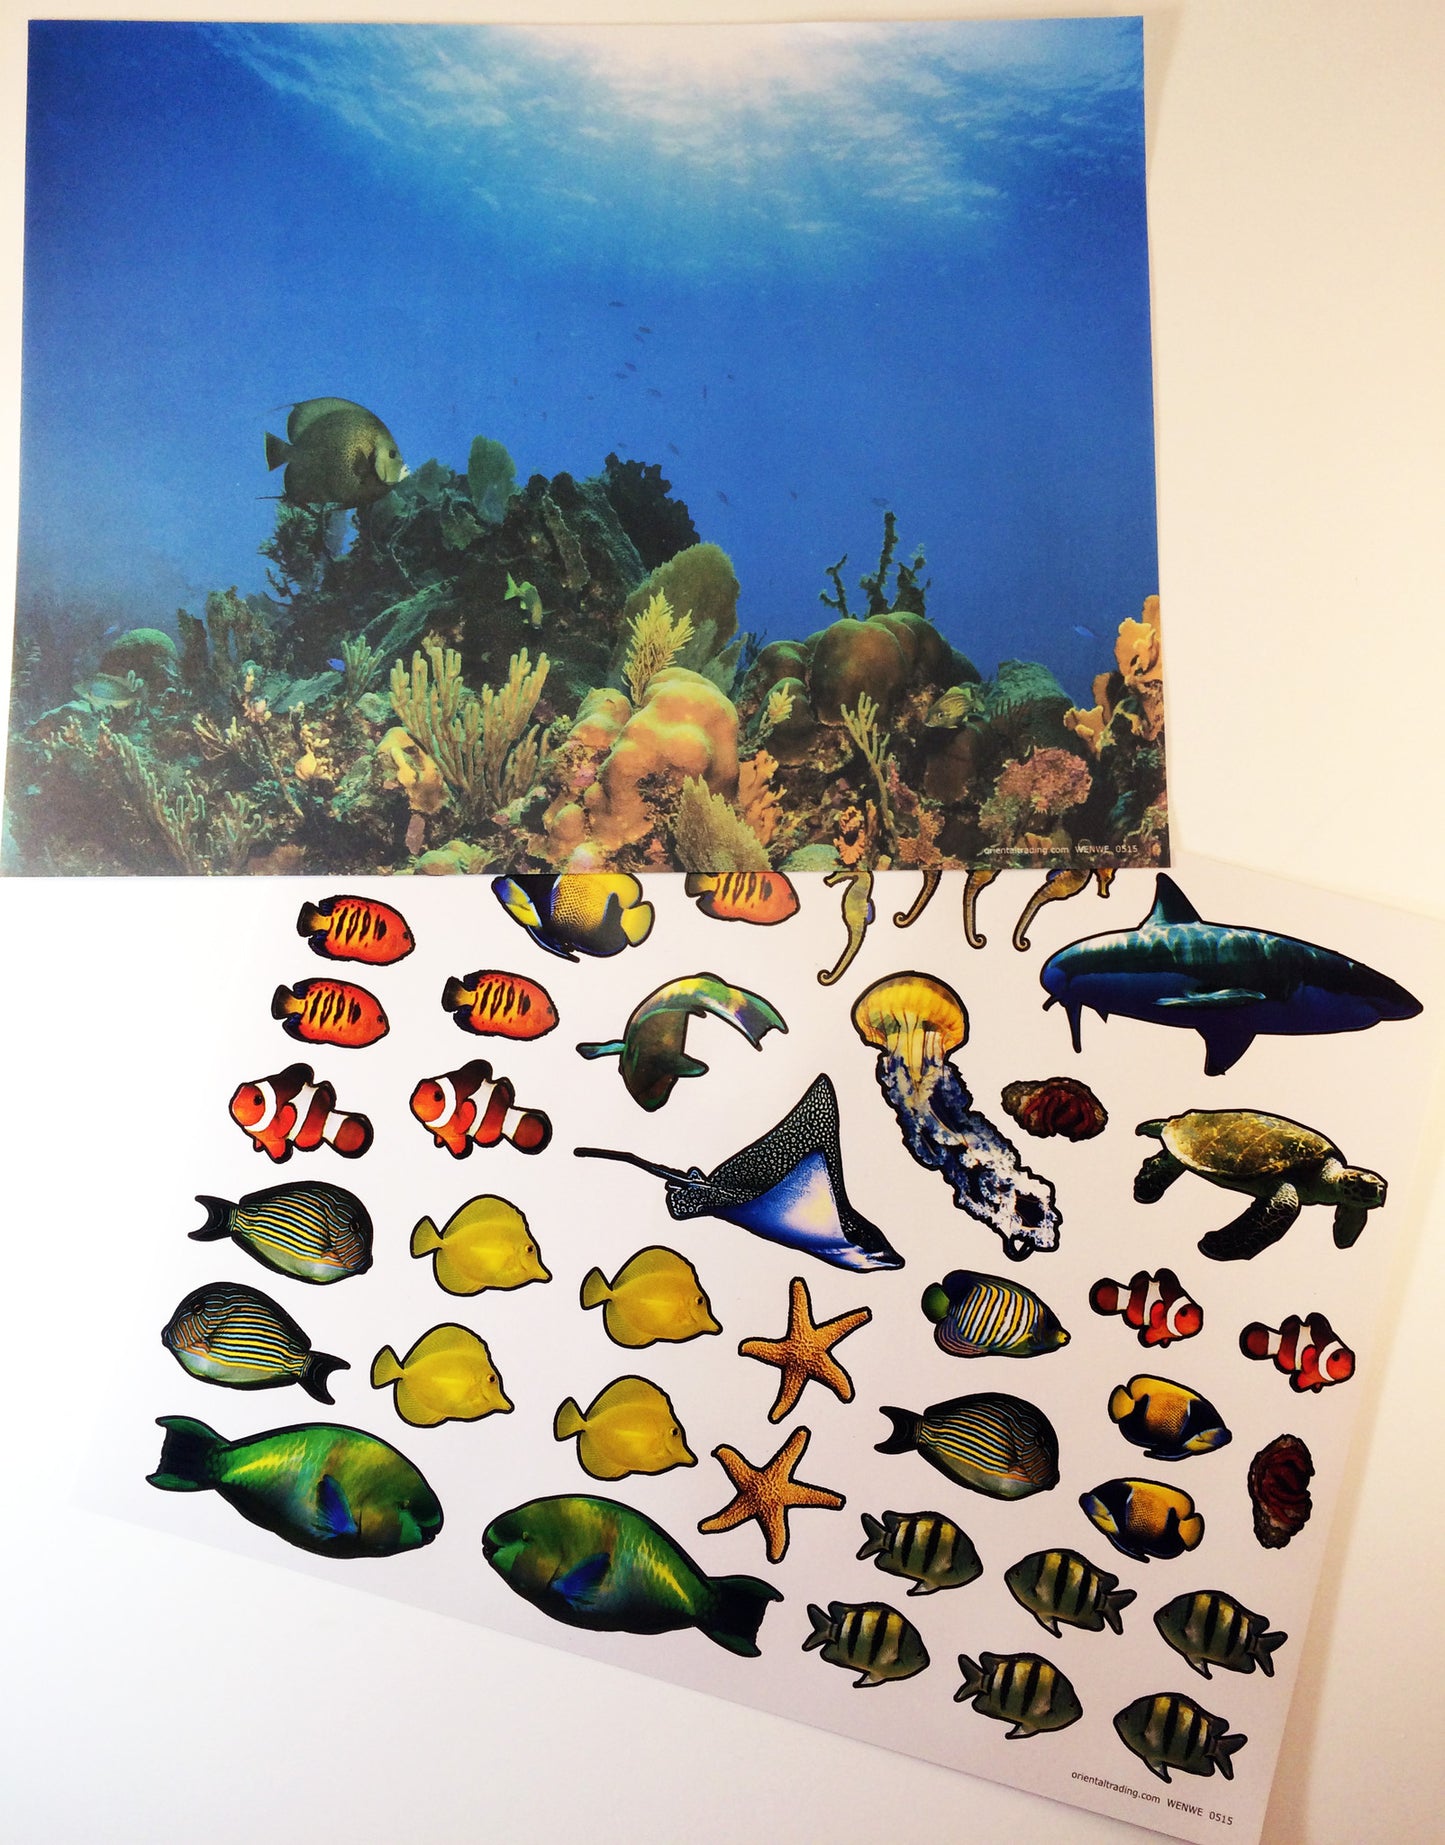 Inspired by the book Over in the Ocean in a Coral Reef: Create your own coral reef scene using stickers